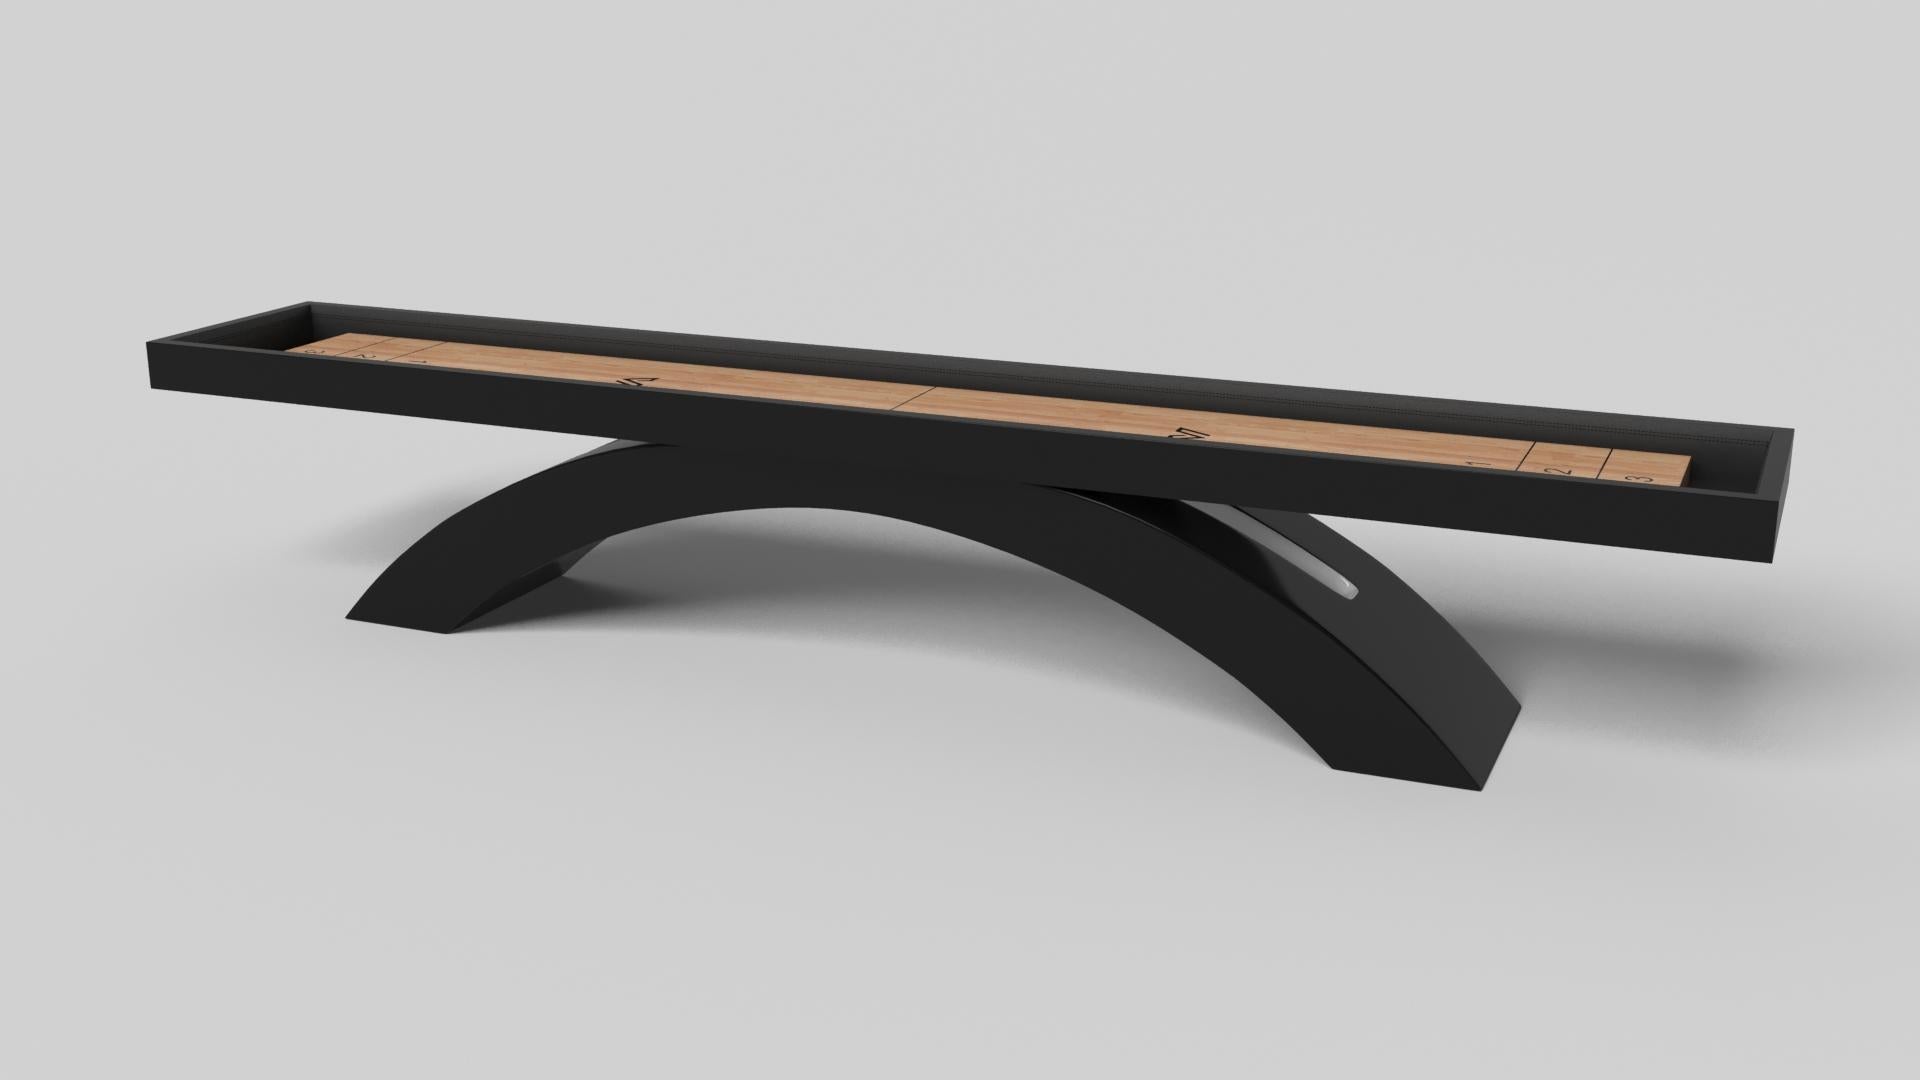 An open, arched base balances beautifully against the hard edges of the rectangular surface top, making the Zenith shuffleboard table in black with red a striking juxtaposition of modern, geometric forms. Minimalist in its appeal yet luxurious in